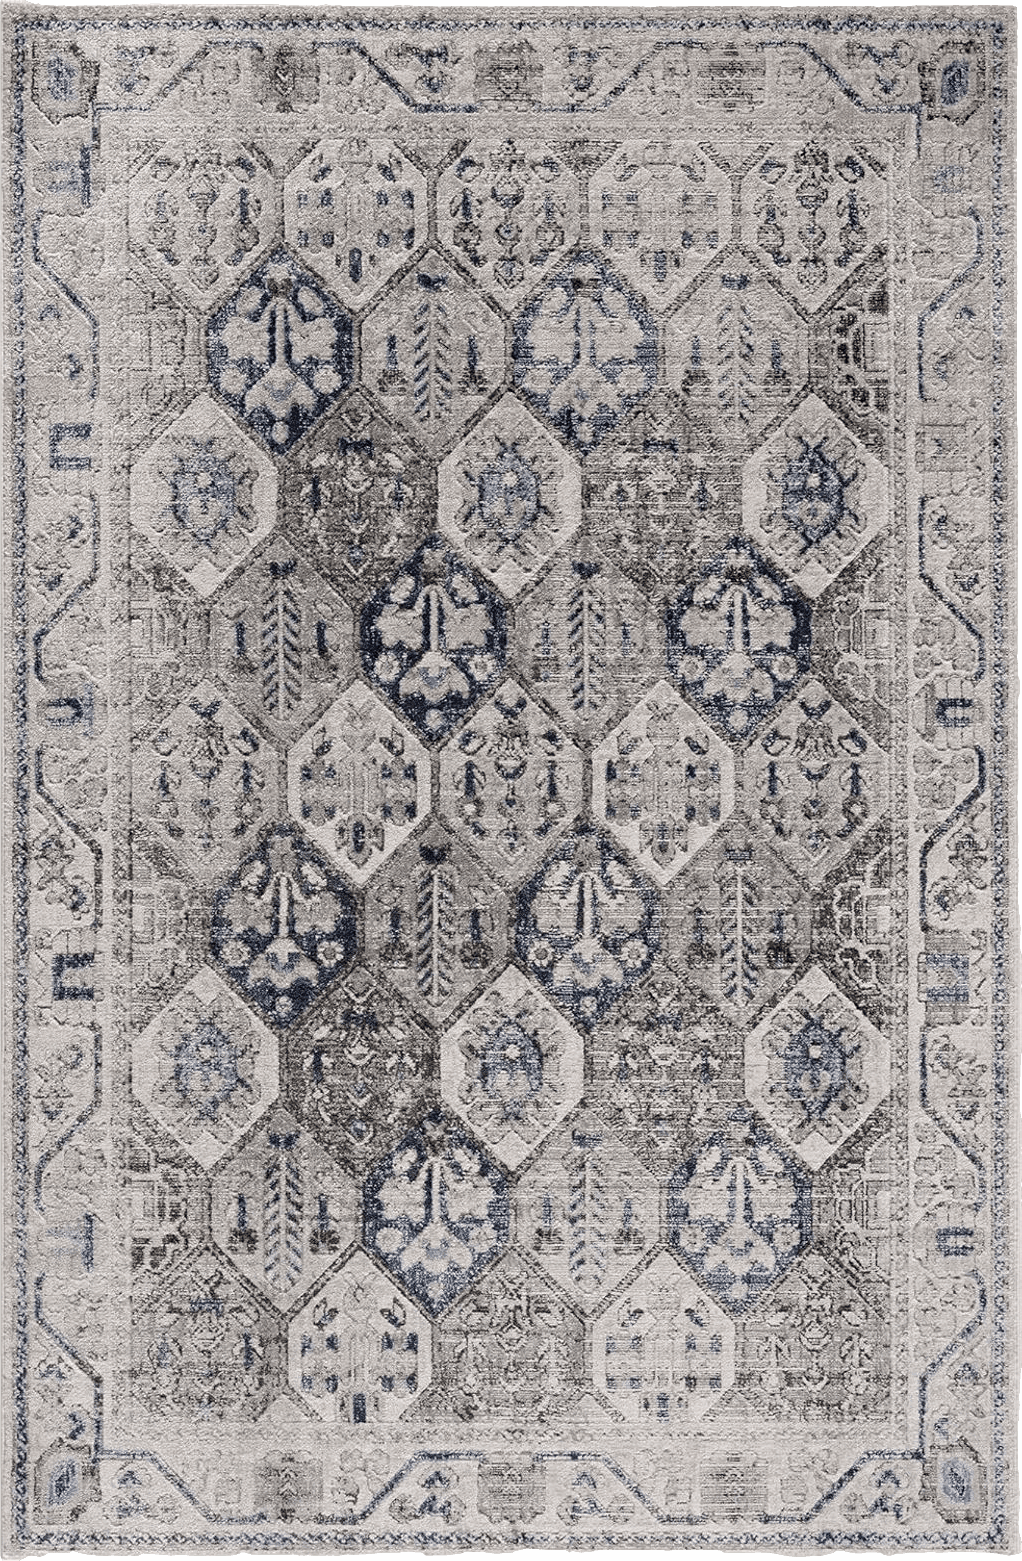 Caria Bloom Rugs Troya Gray/Blue 6x9 Rug - Traditional Persian Area Rug for Living Room, Bedroom, Dining Room, and Kitchen - Exact Size: 6' x 9'